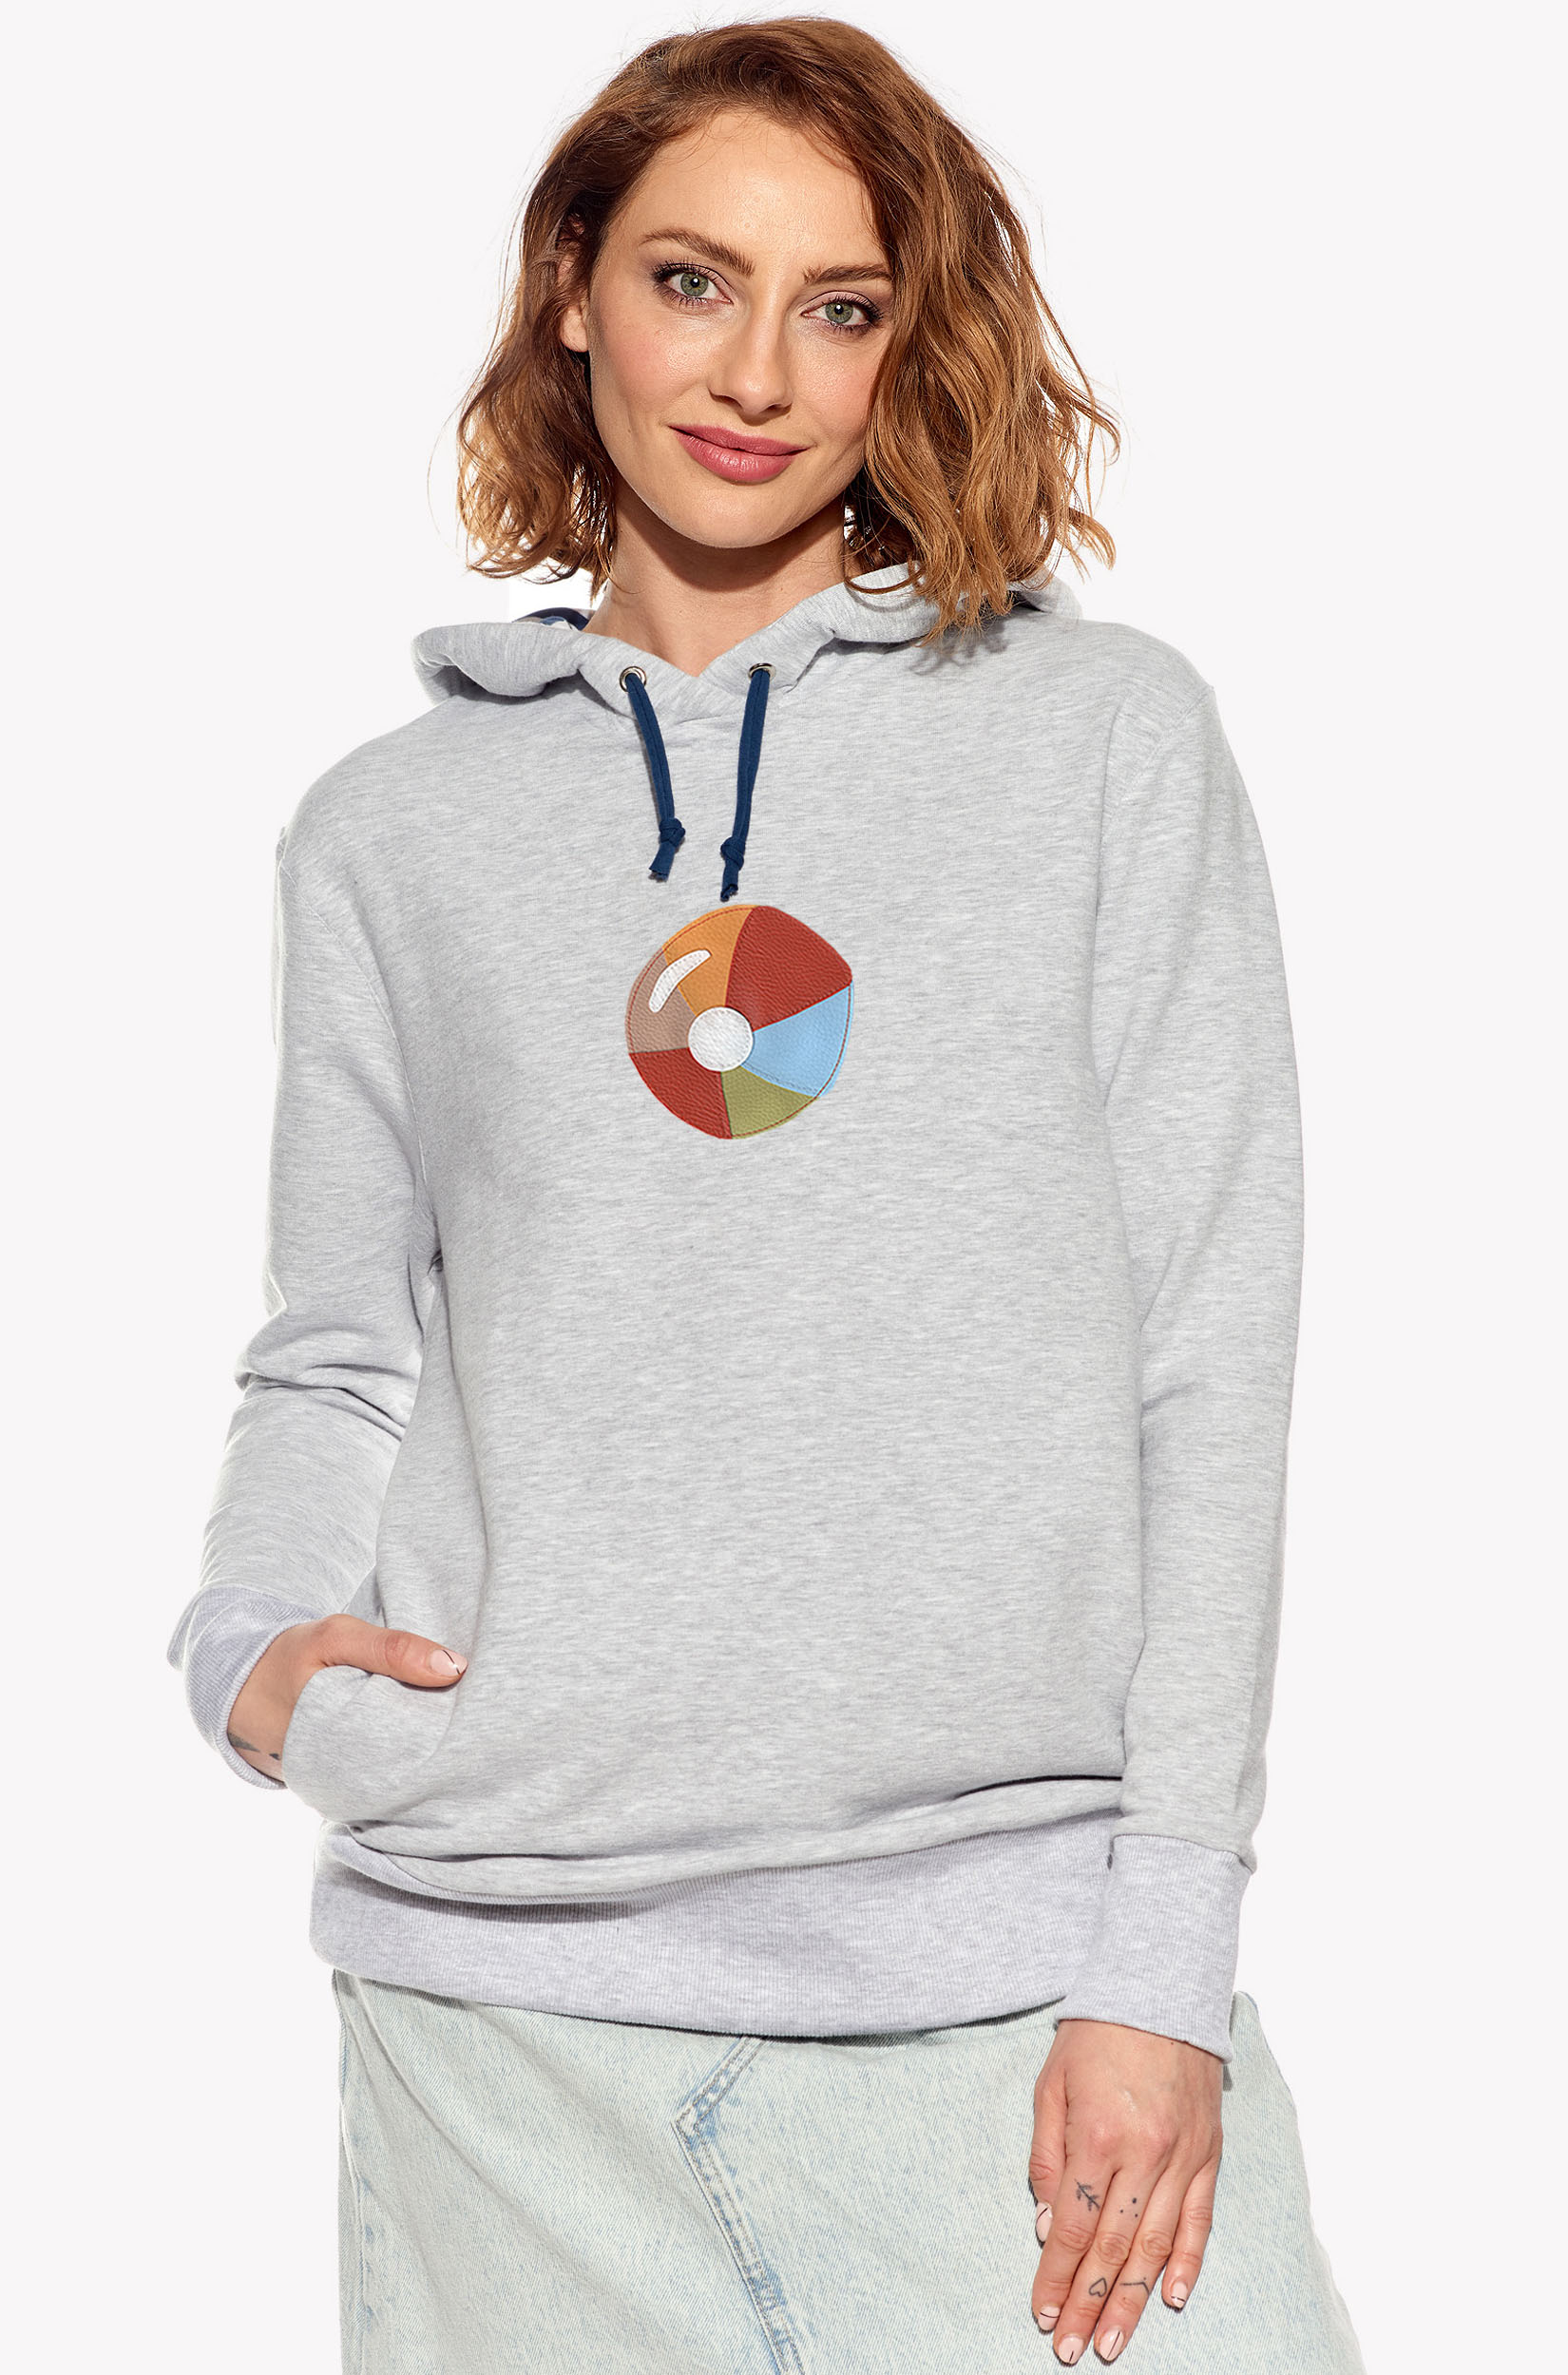 Hoodie with ball